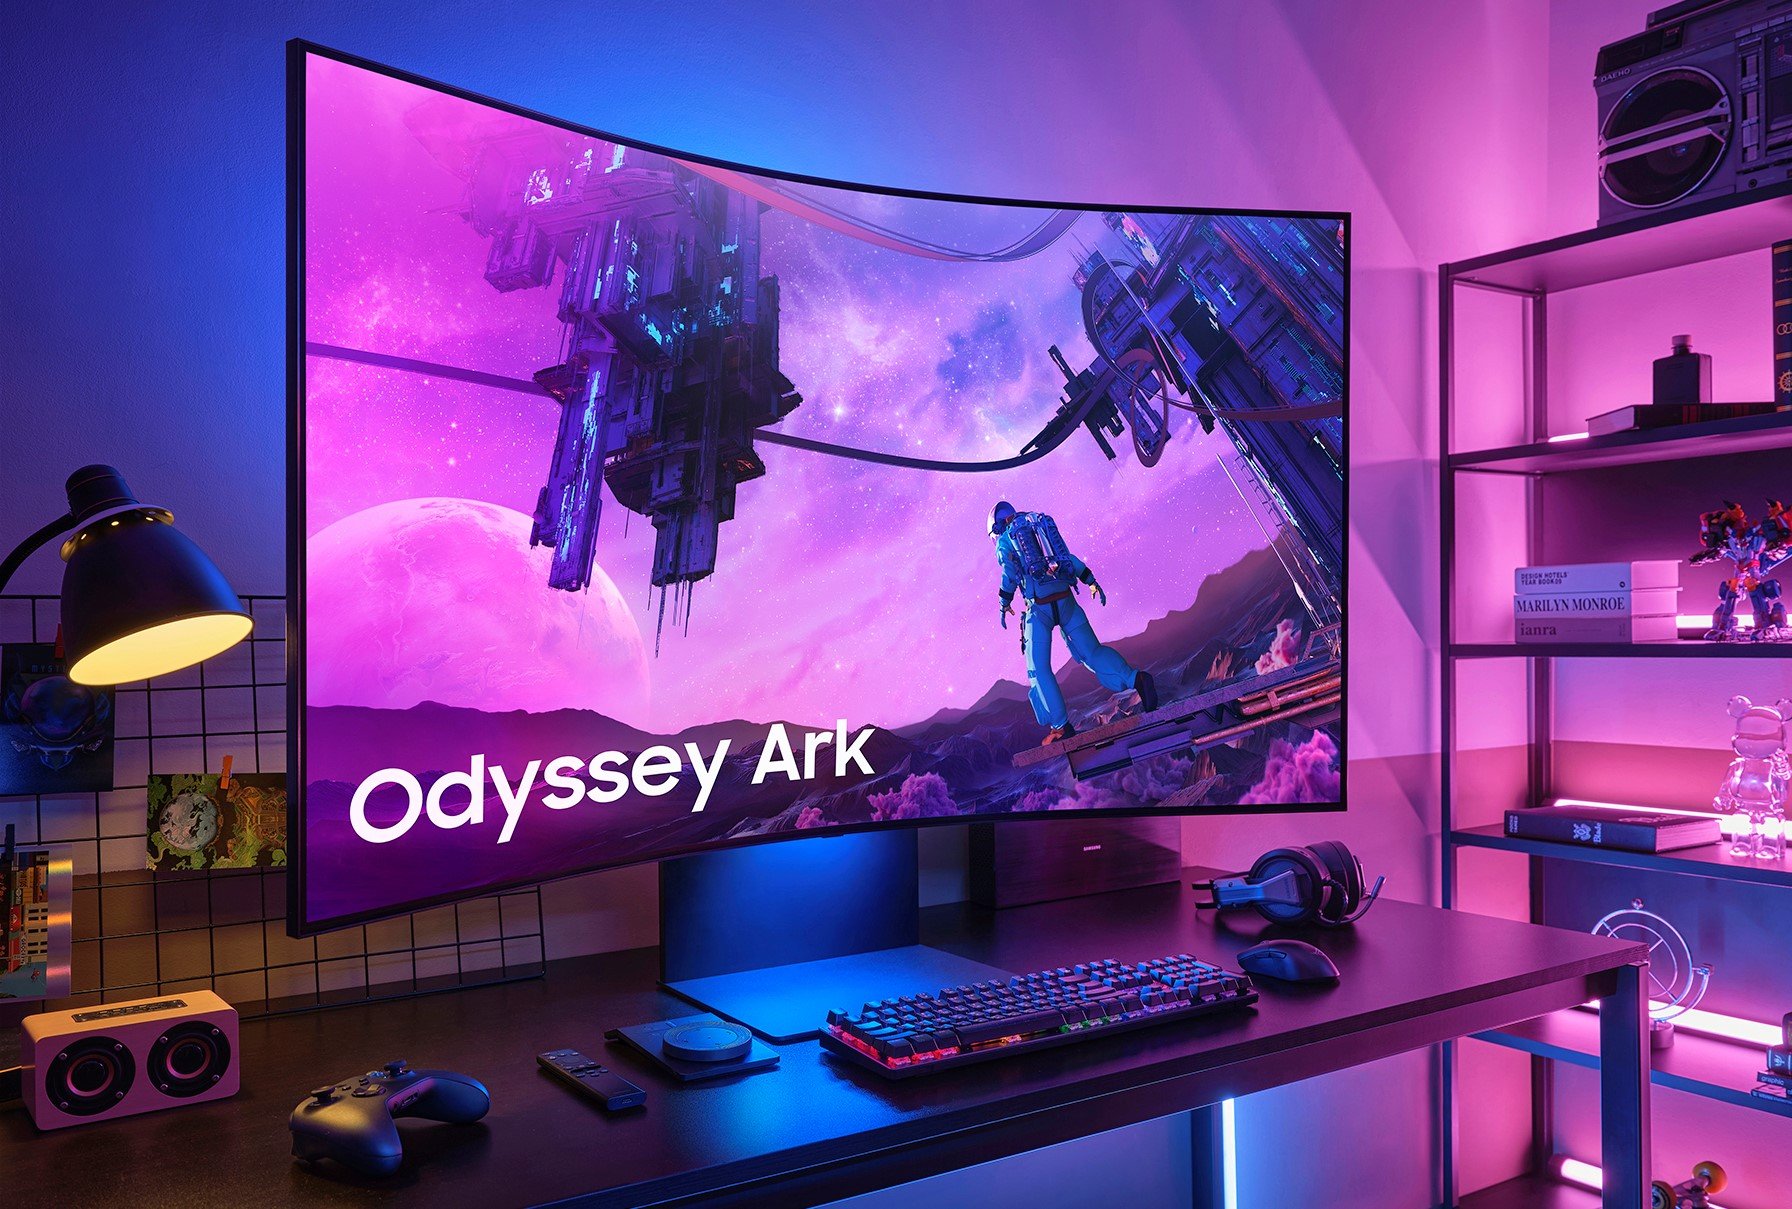 55-inch Samsung Odyssey Ark is enjoying a MASSIVE 40% discount RIGHT NOW!